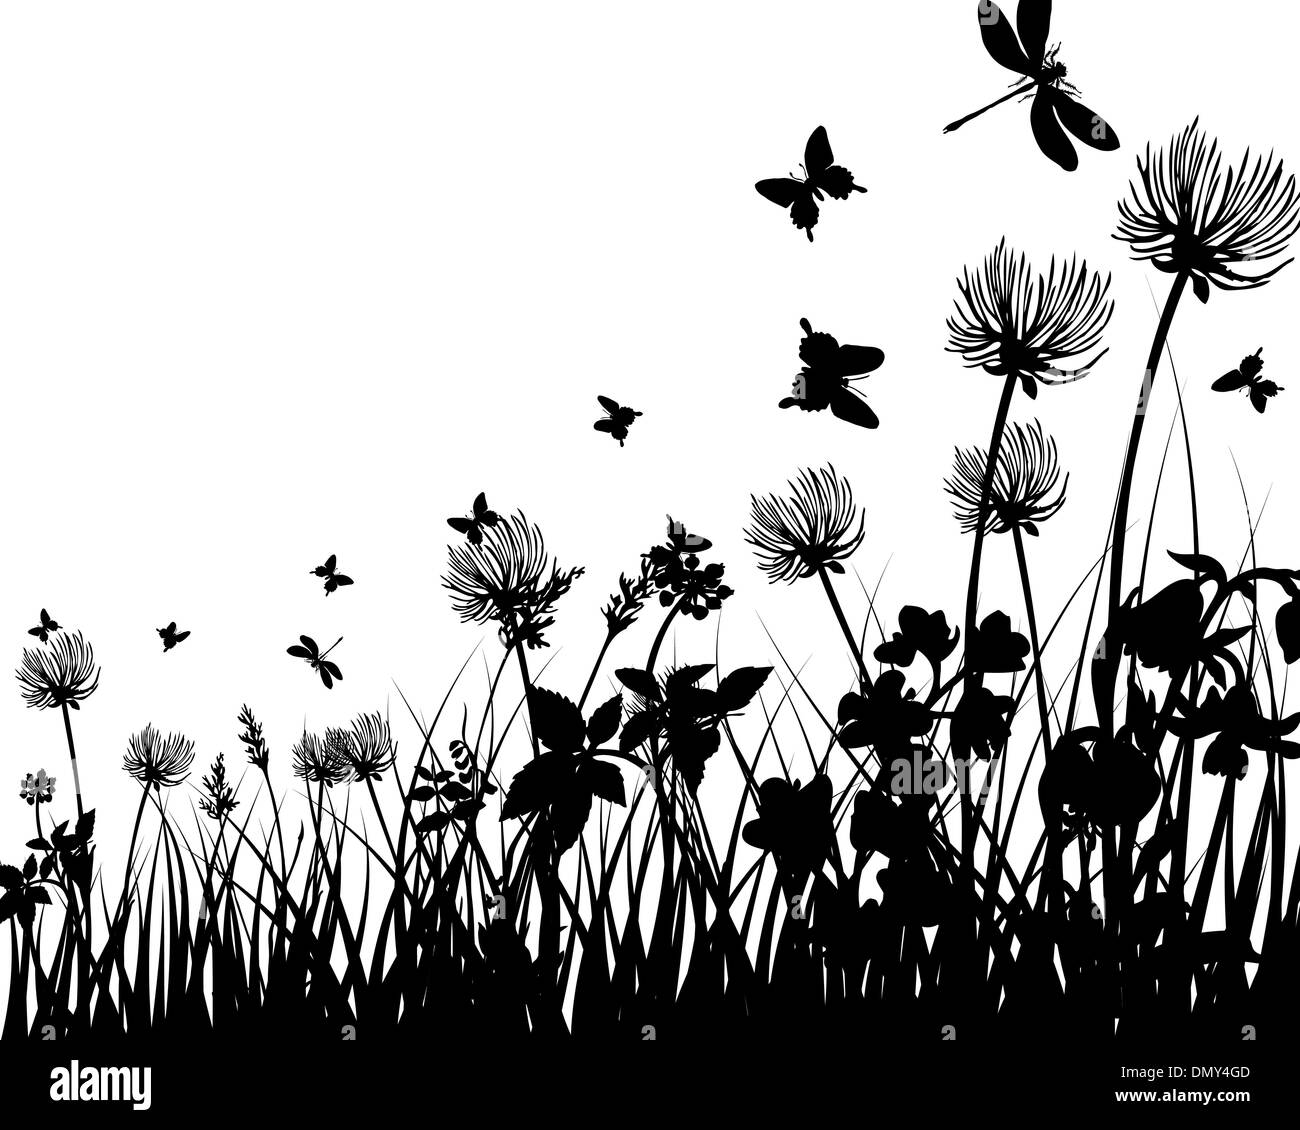 meadow silhouettes Stock Vector